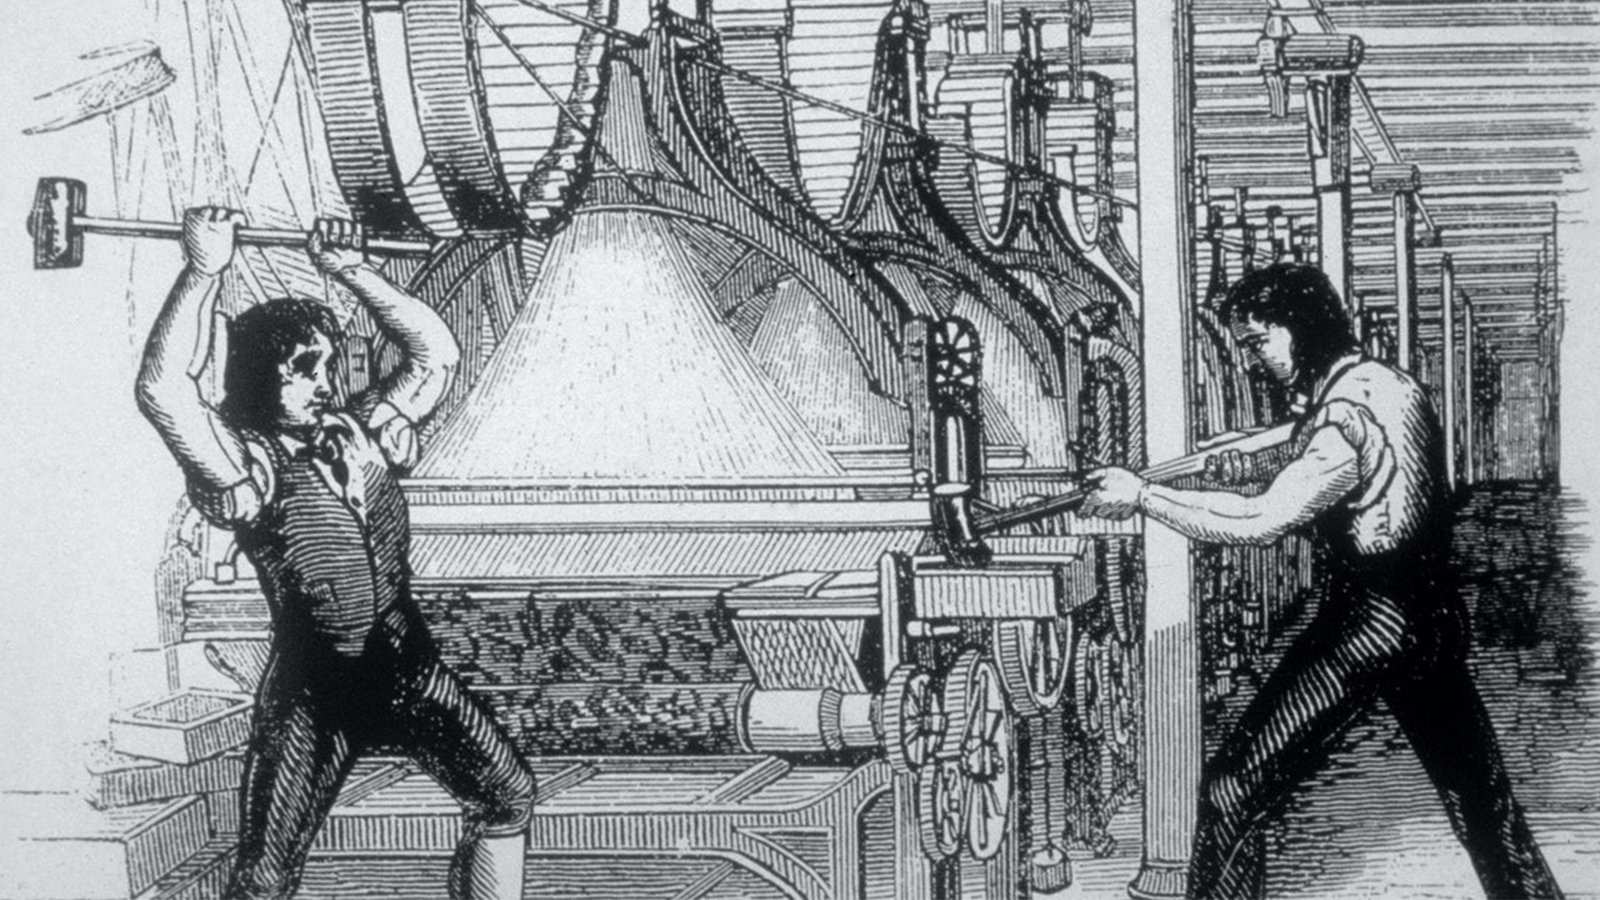 luddite history, old illustration of two men working in a factory, one holding a hammer up high